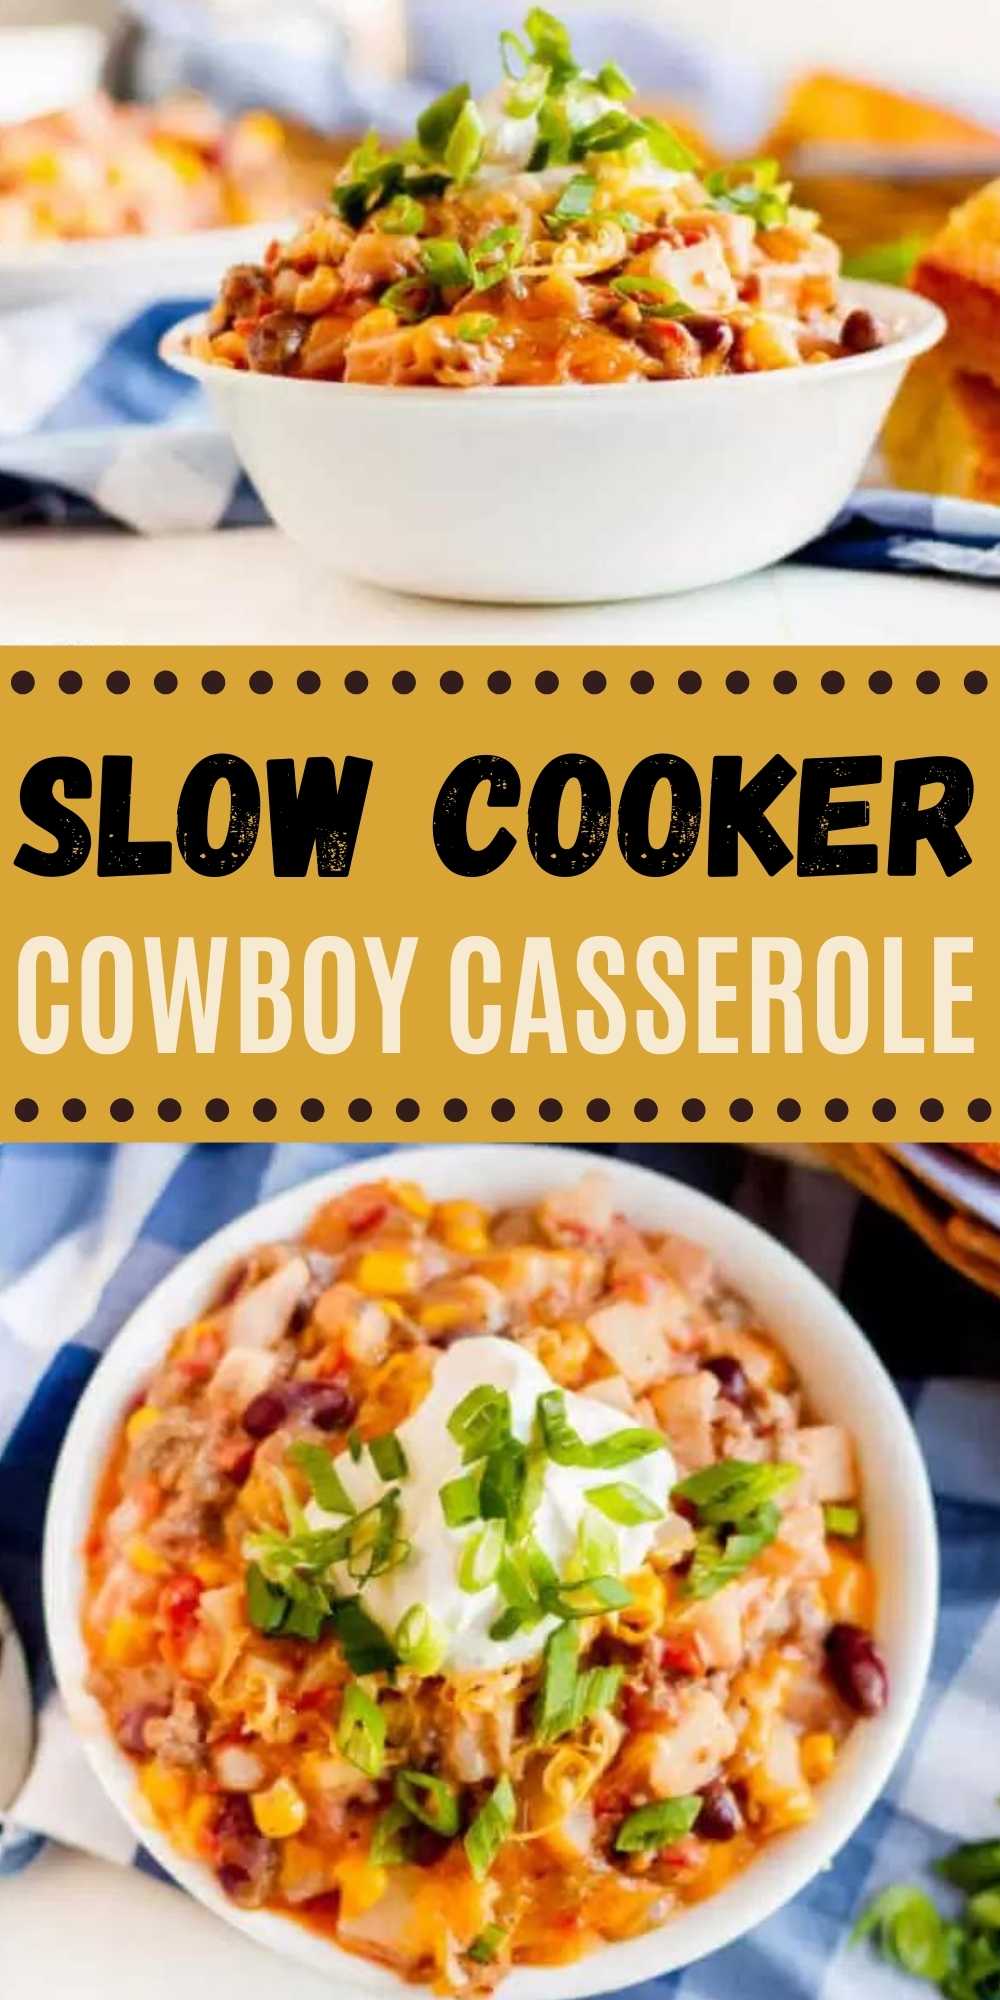 Crockpot Cowboy Casserole has all you need for an easy meal in the slow cooker. Each bite of this Cheesy Cowboy casserole crock pot recipe is loaded with tons of flavor.  I love easy recipes made in a slow cooker and this is one of my favorite super easy crock pot meals! #eatingonadime #crockpotrecipes #slowcookerrecipes #beefrecipes 
